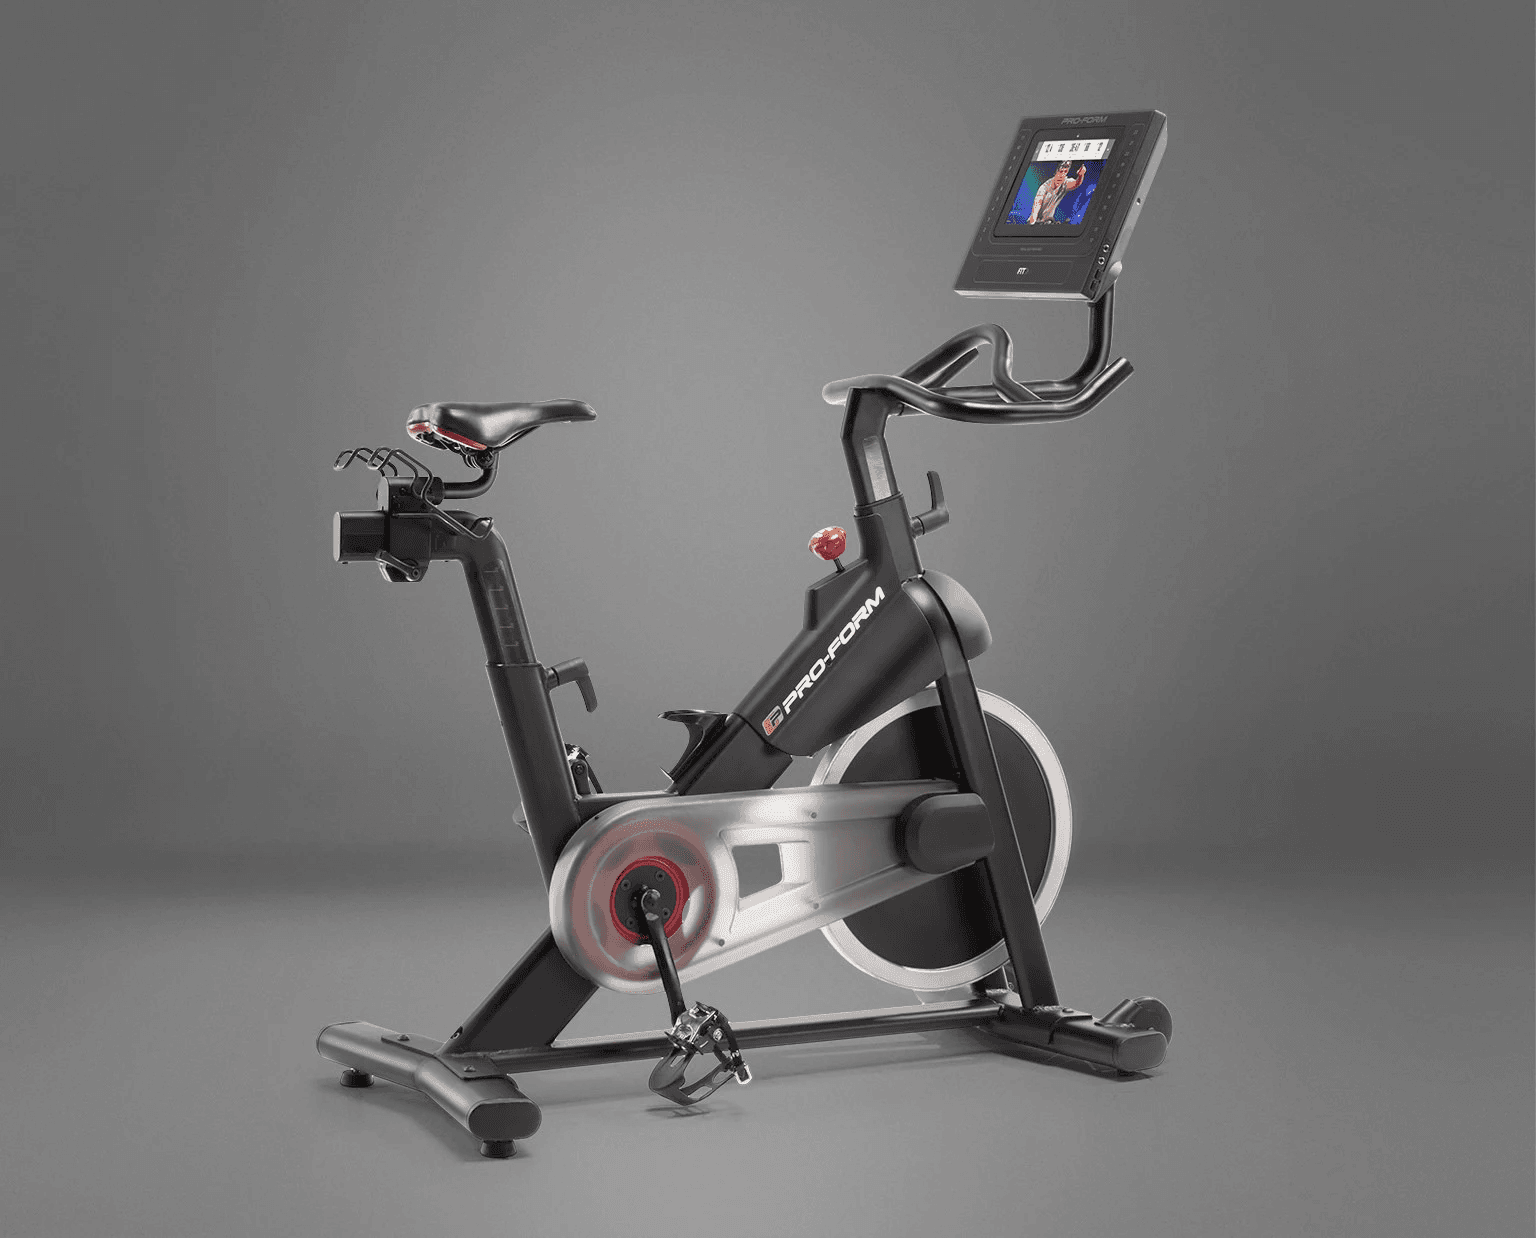 A black, grey, and red exercise bike with display console.